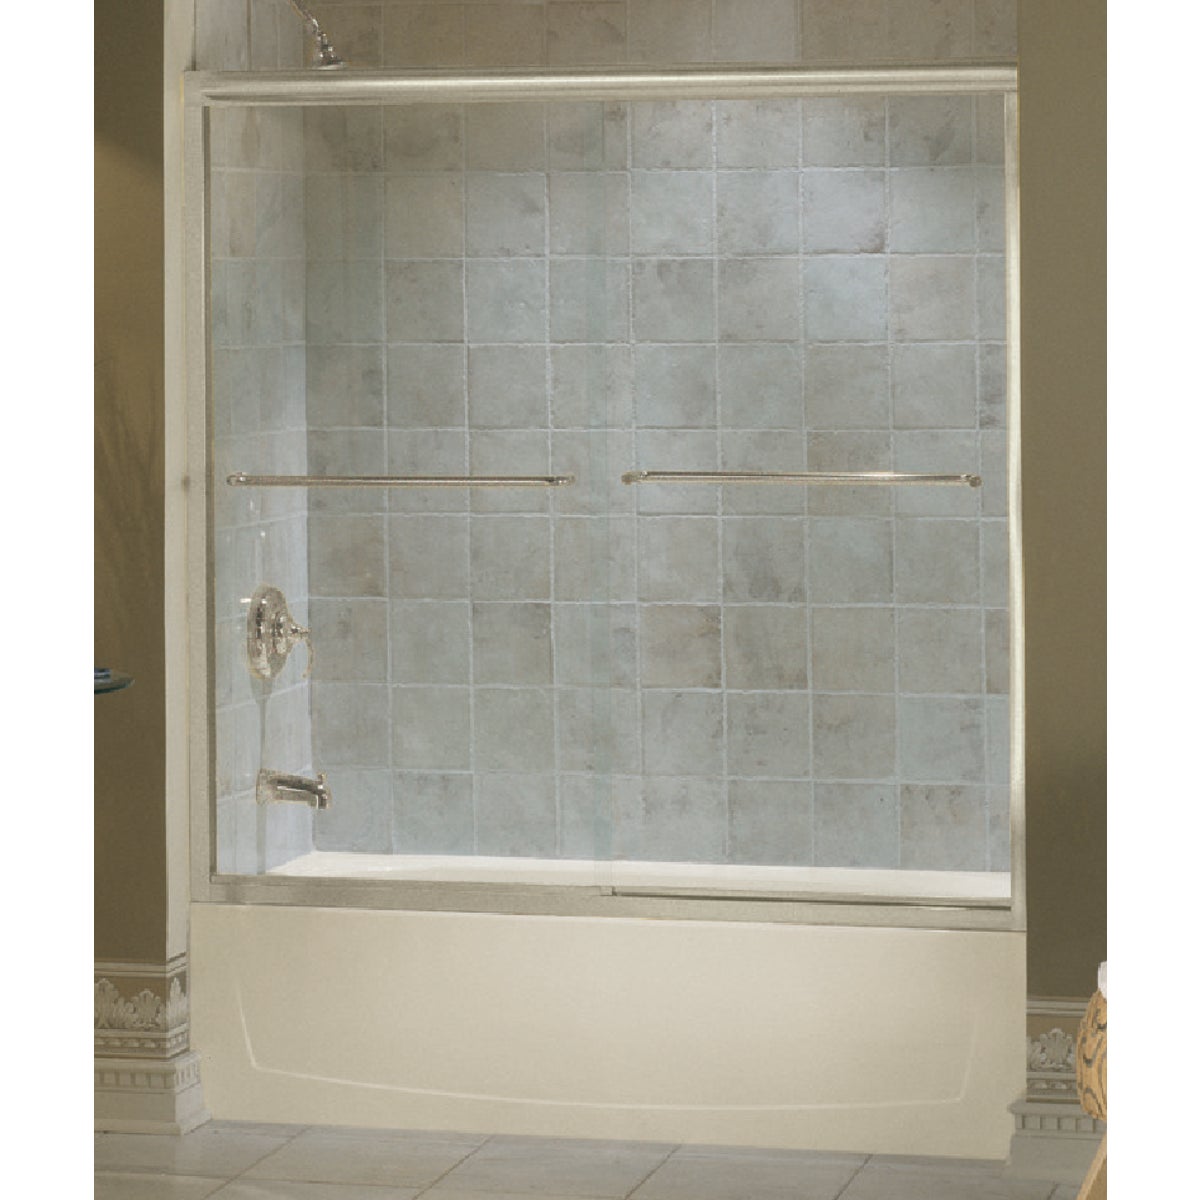 Item 443506, This door offers minimal metal framing around the glass to showcase the 